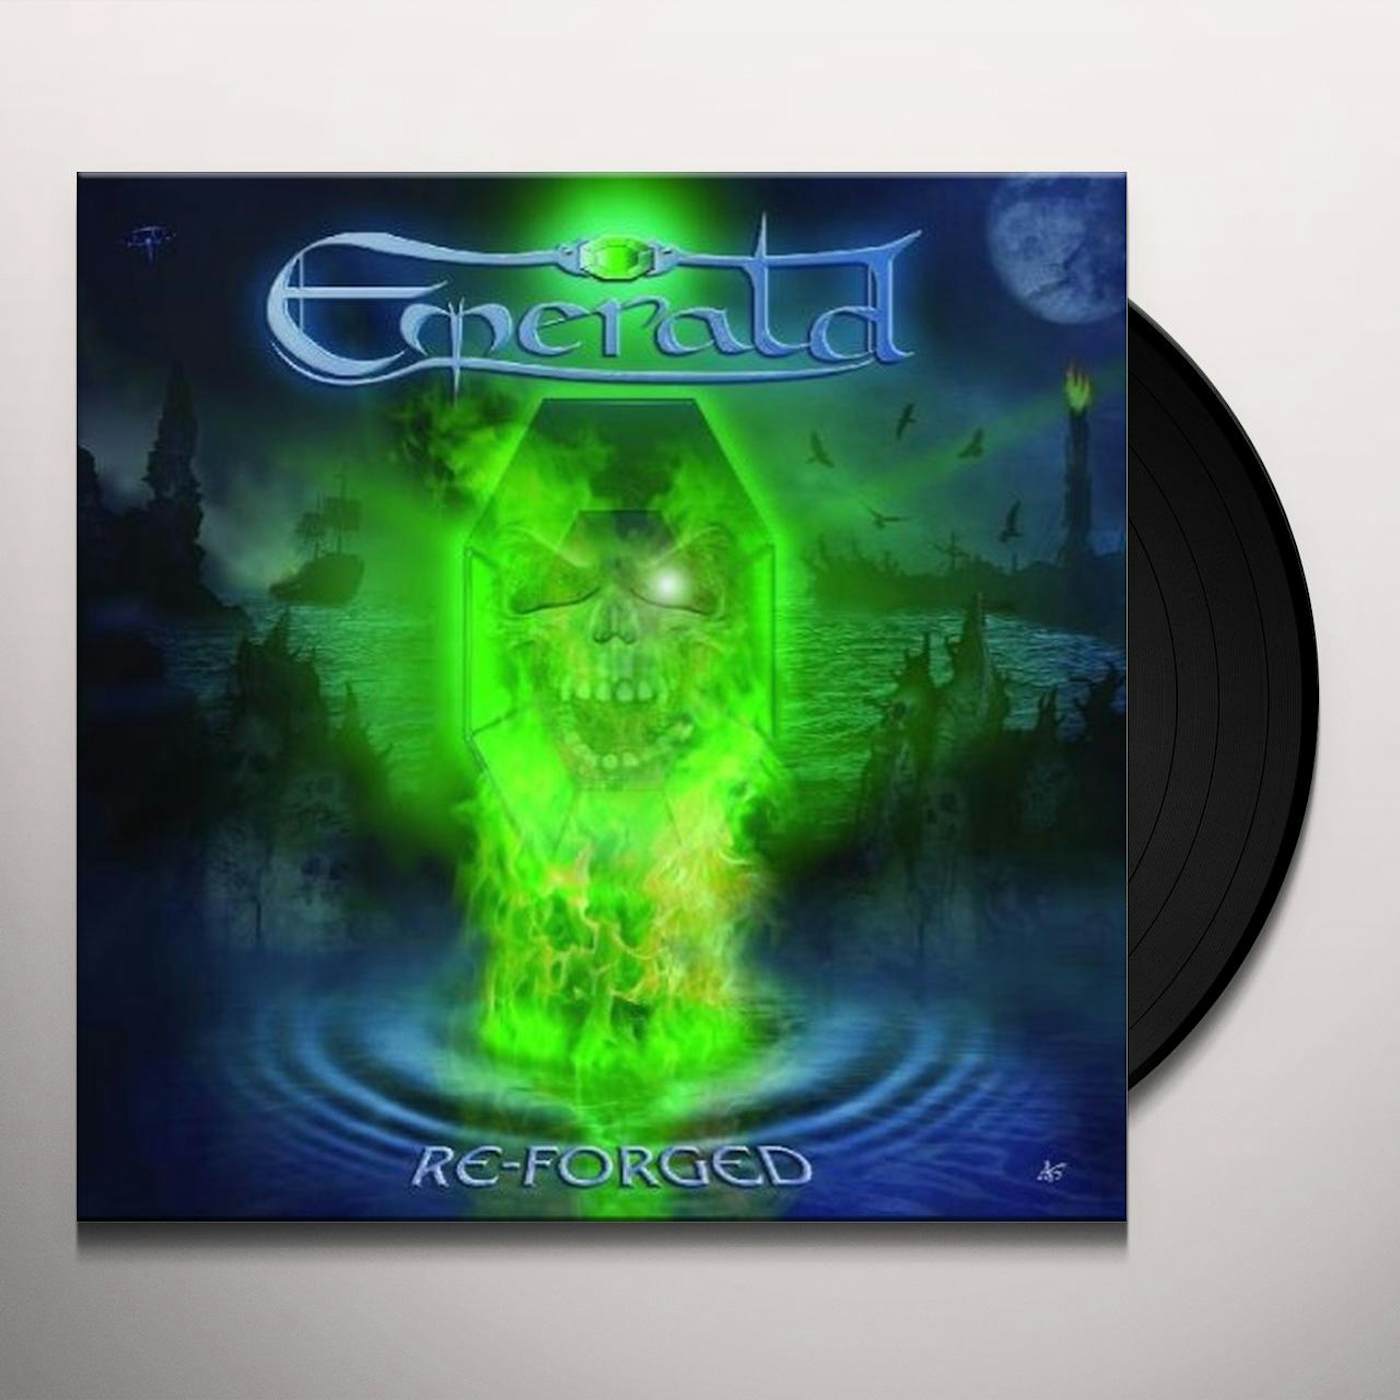 Emerald Re-Forged Vinyl Record